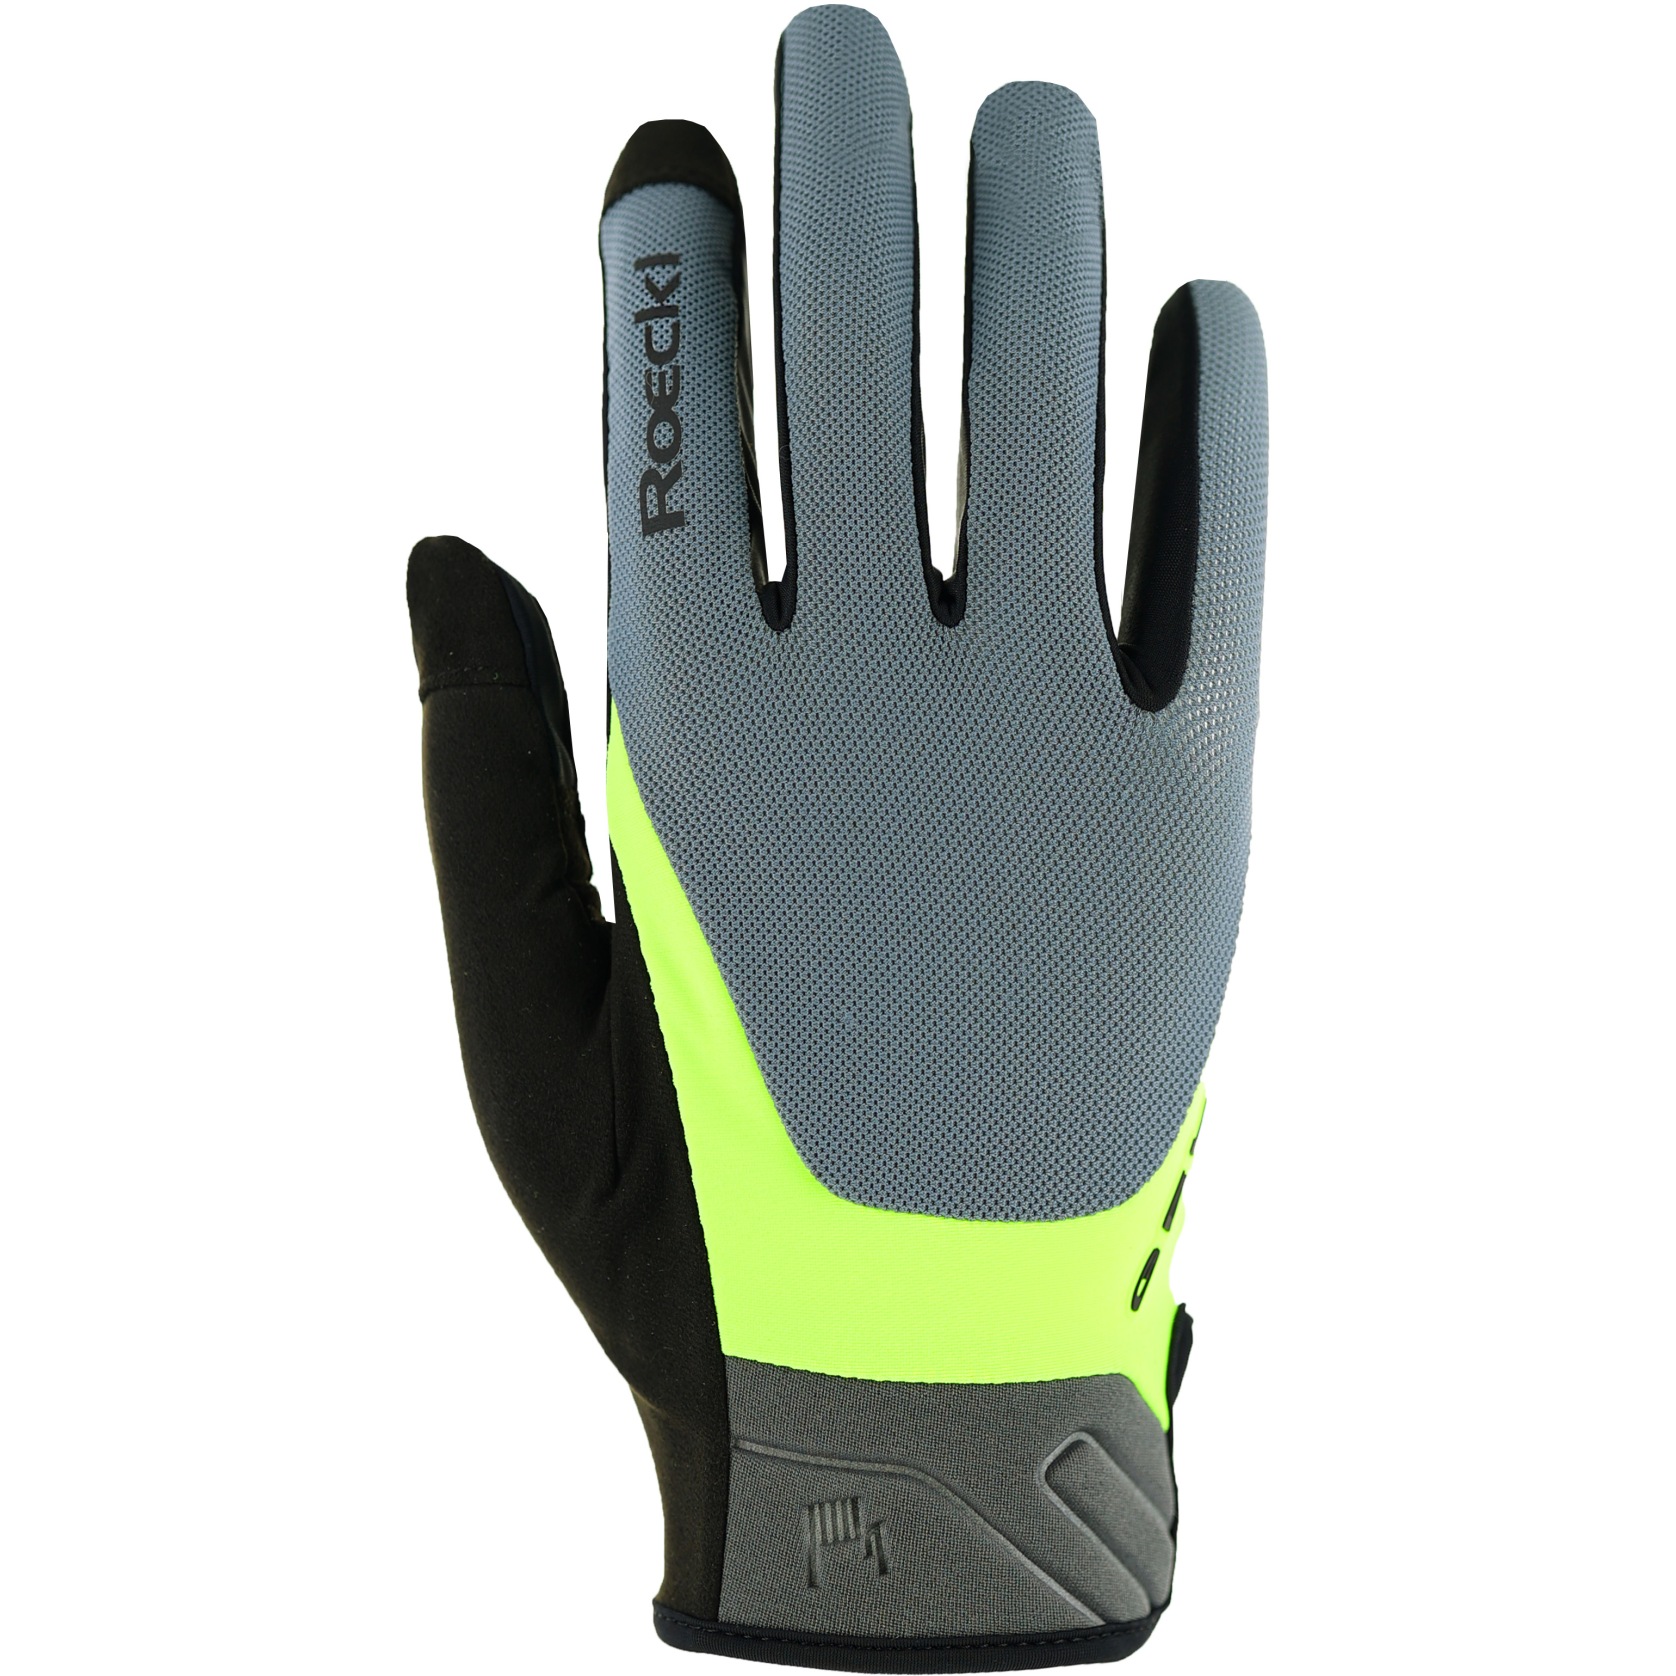 Picture of Roeckl Sports Mori 2 Cycling Gloves - hurricane grey/fluo yellow 8503